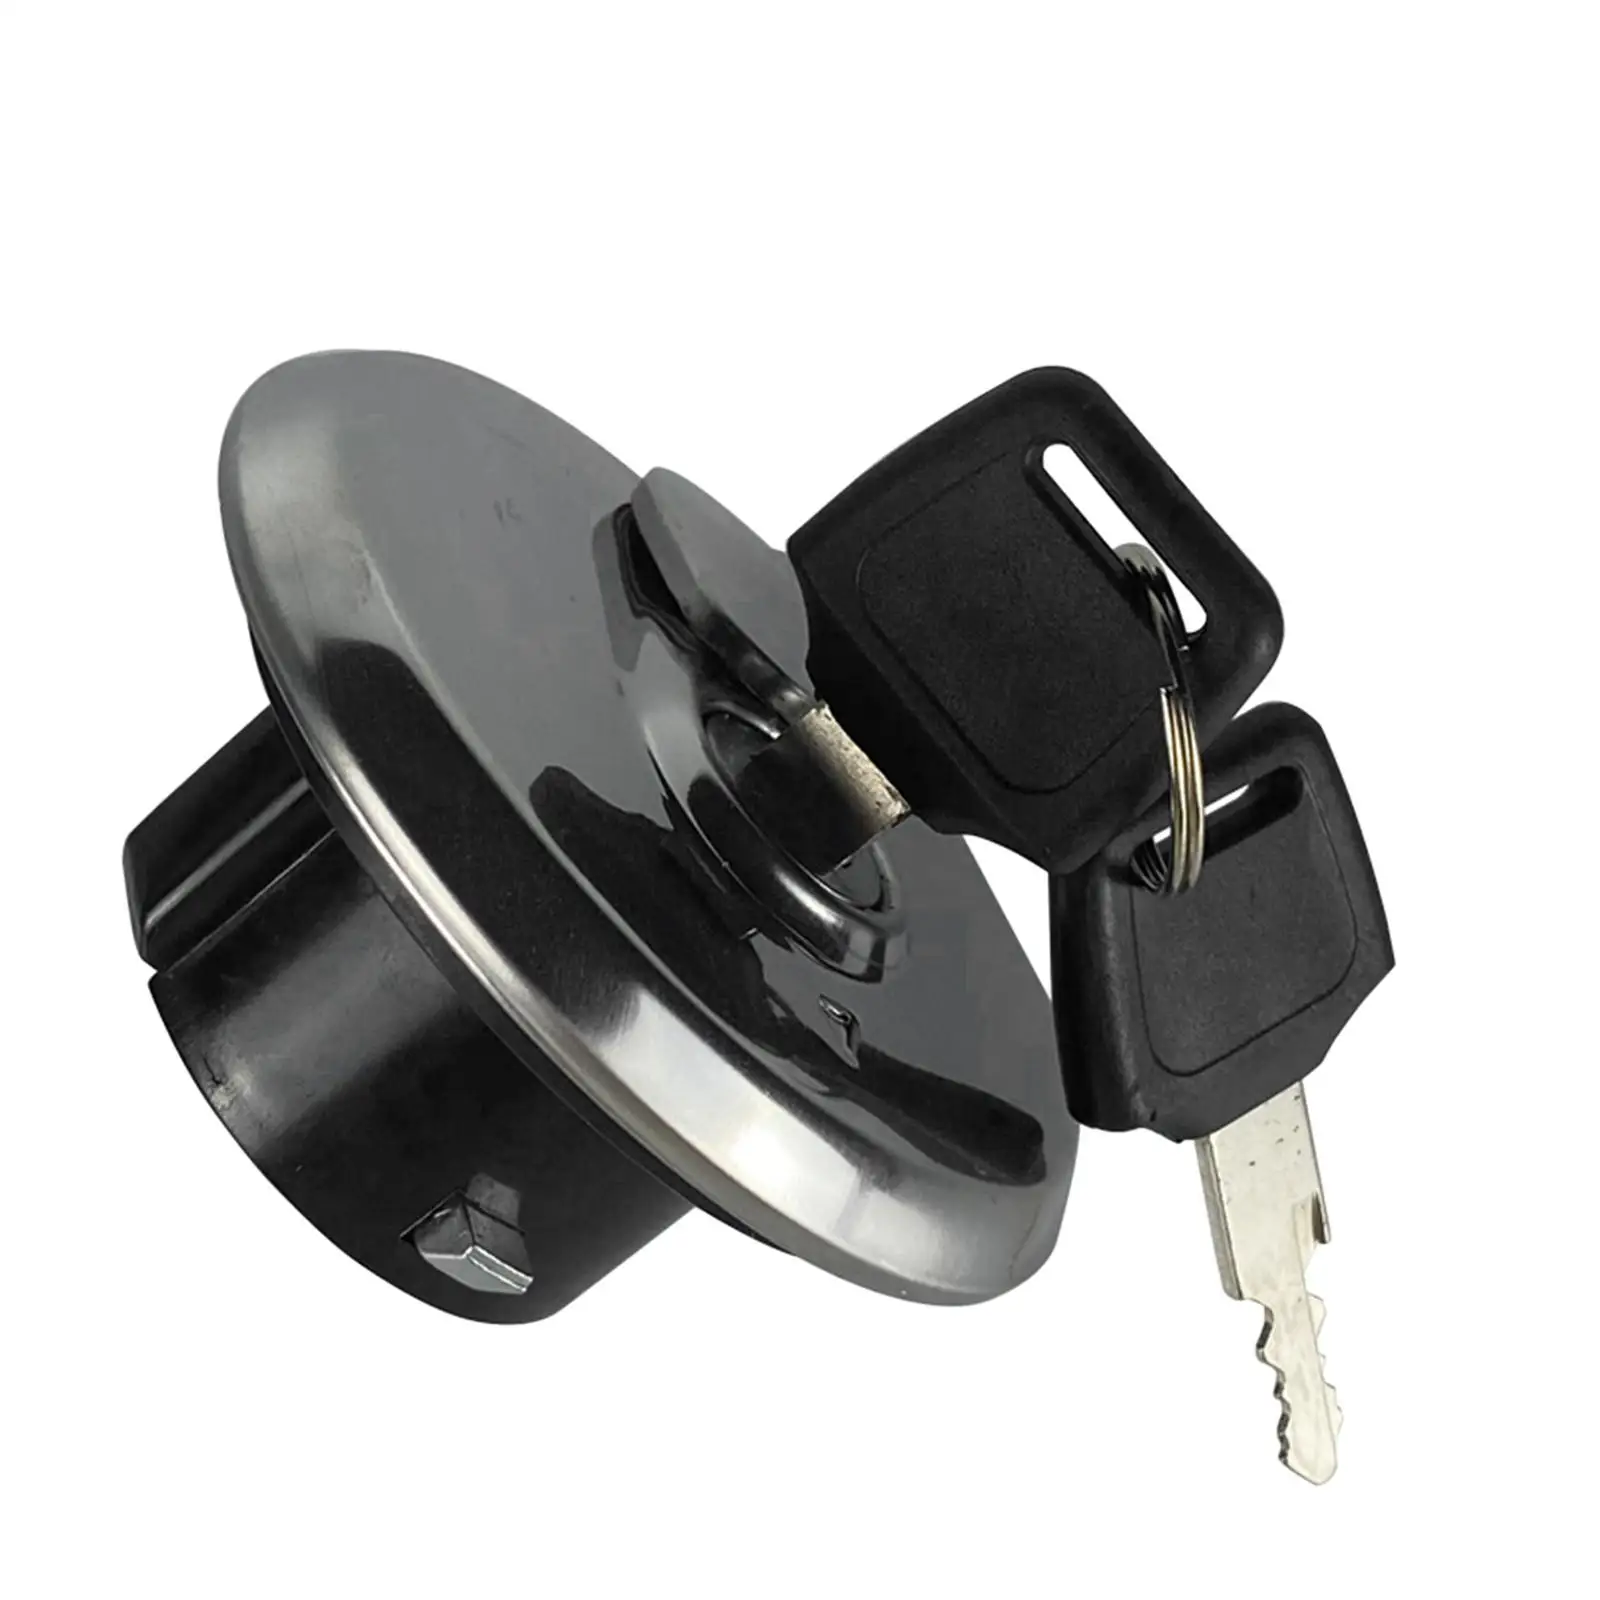 Motorbike Fuel Gas Tank Cap Cover Replaces with Keys for Suzuki Gn125